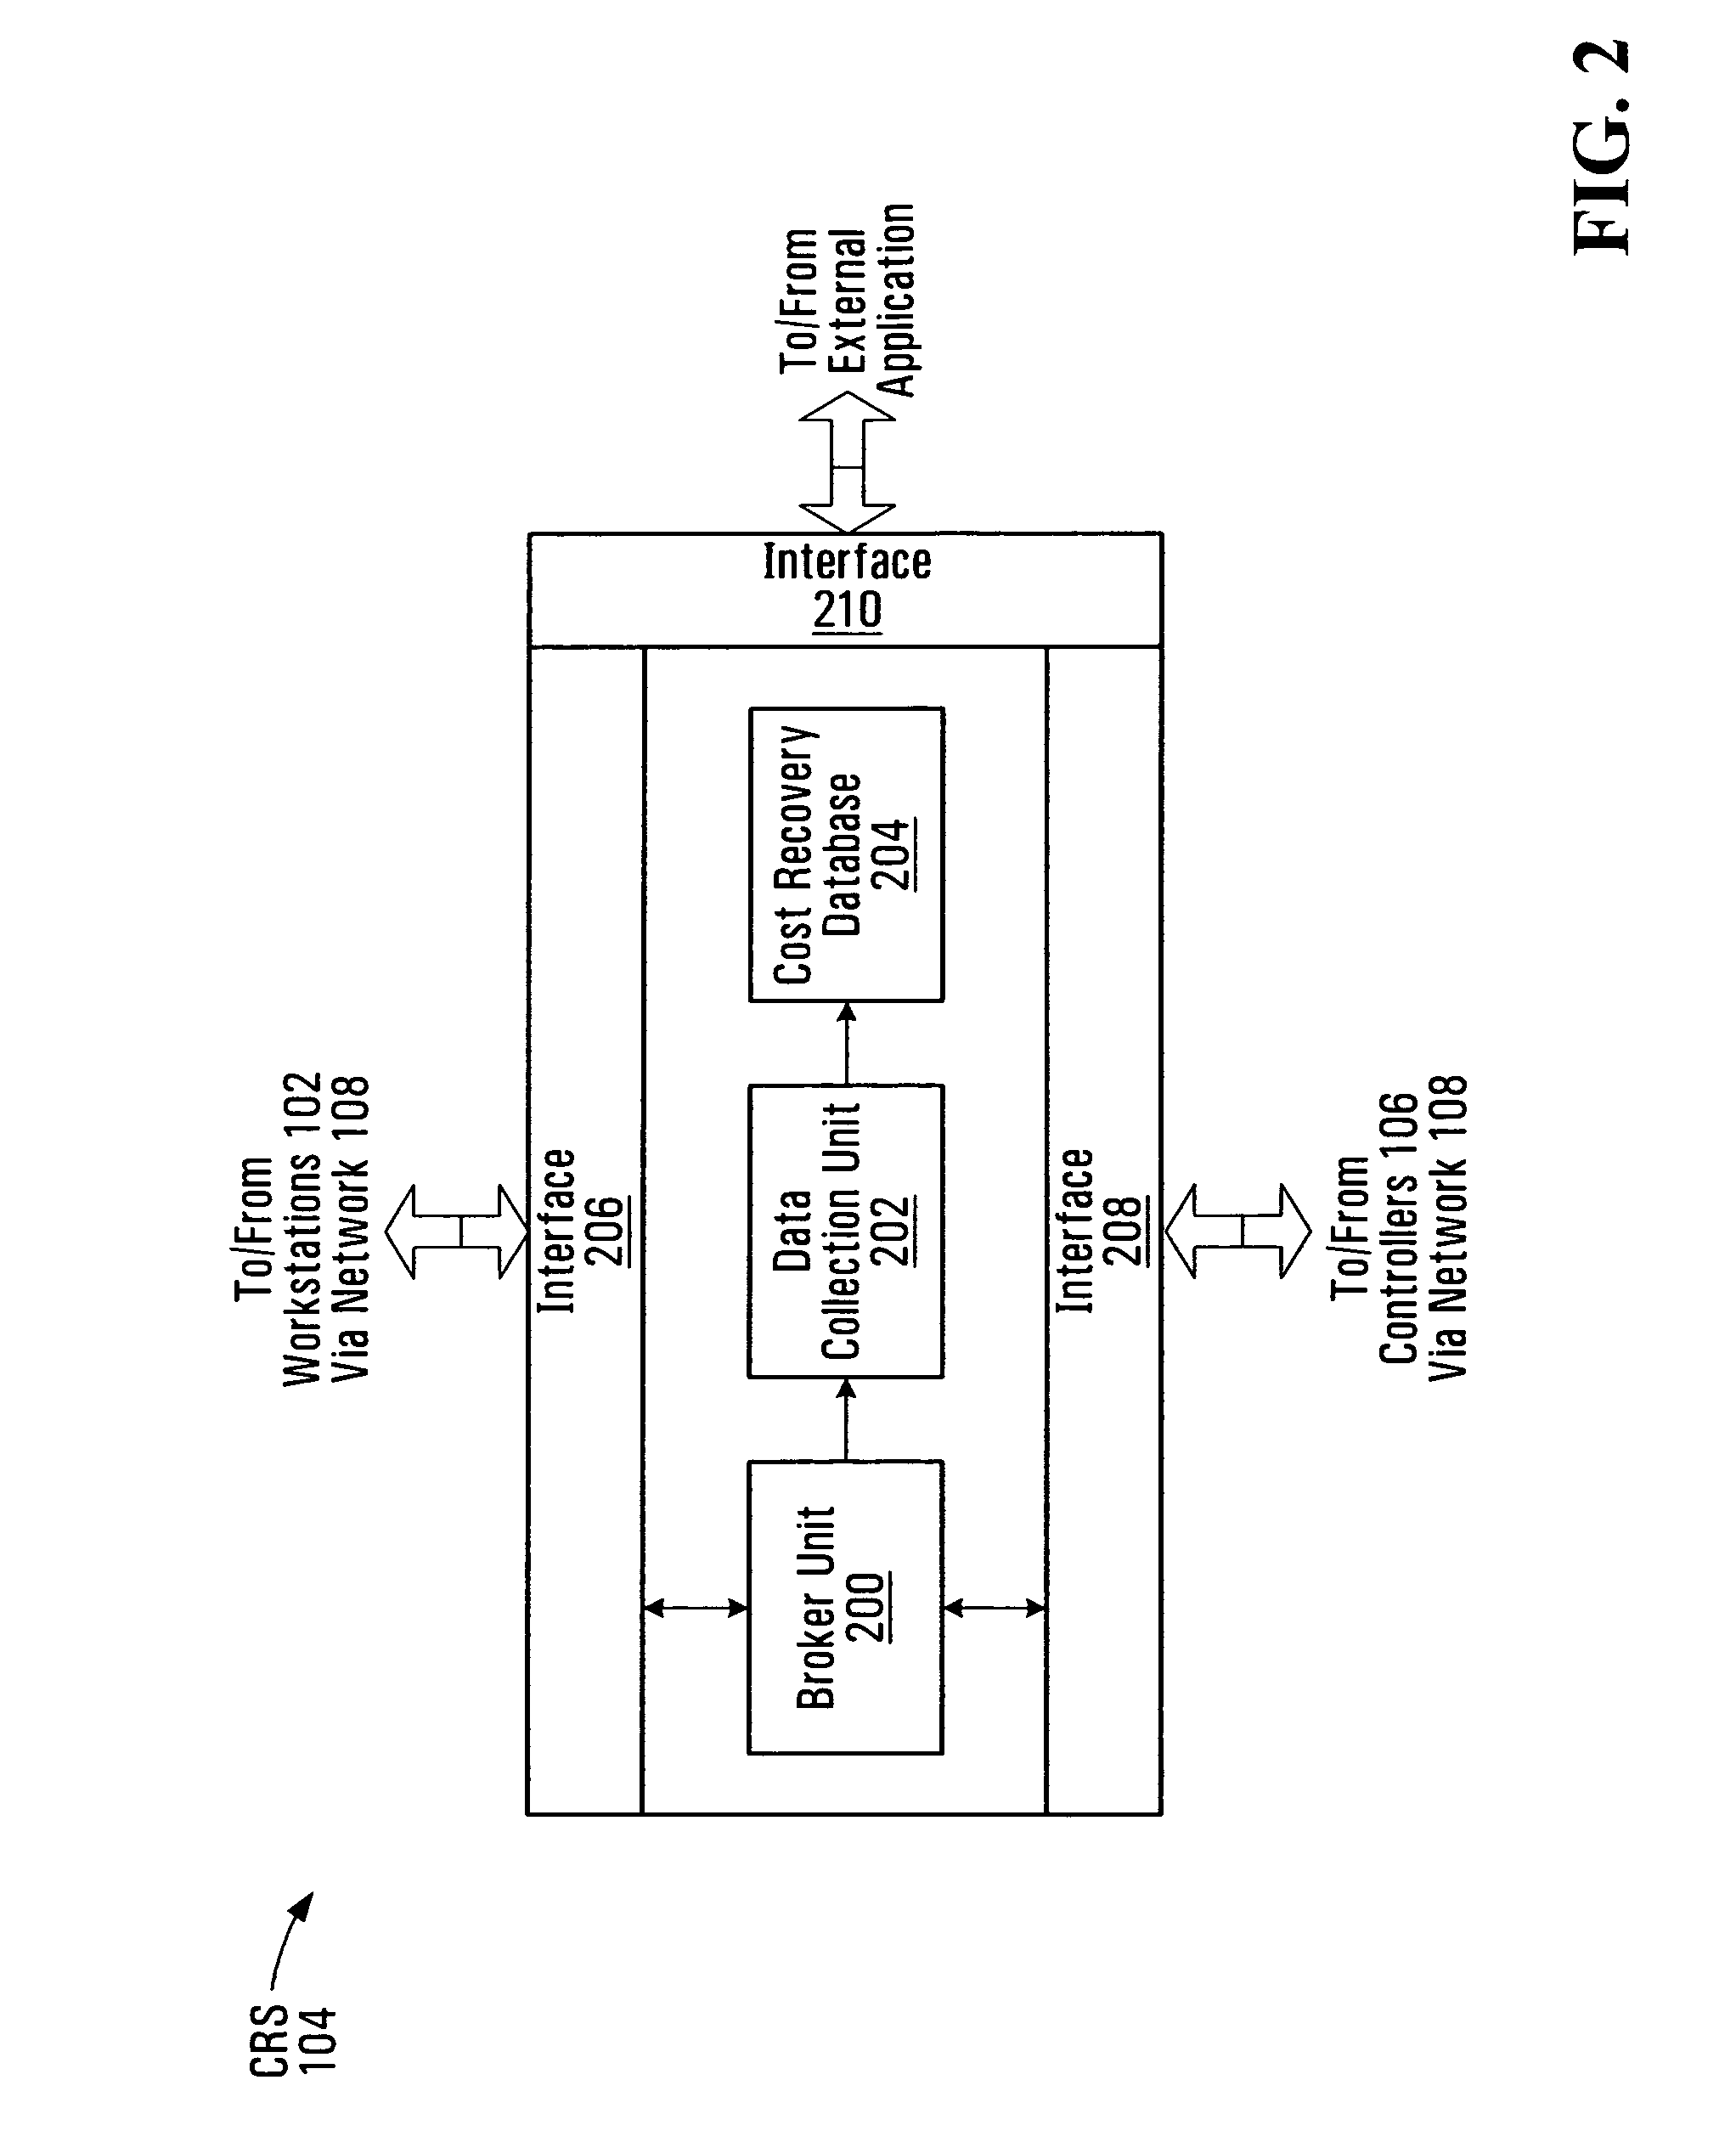 Cost recovery system and method for walk-up office equipment